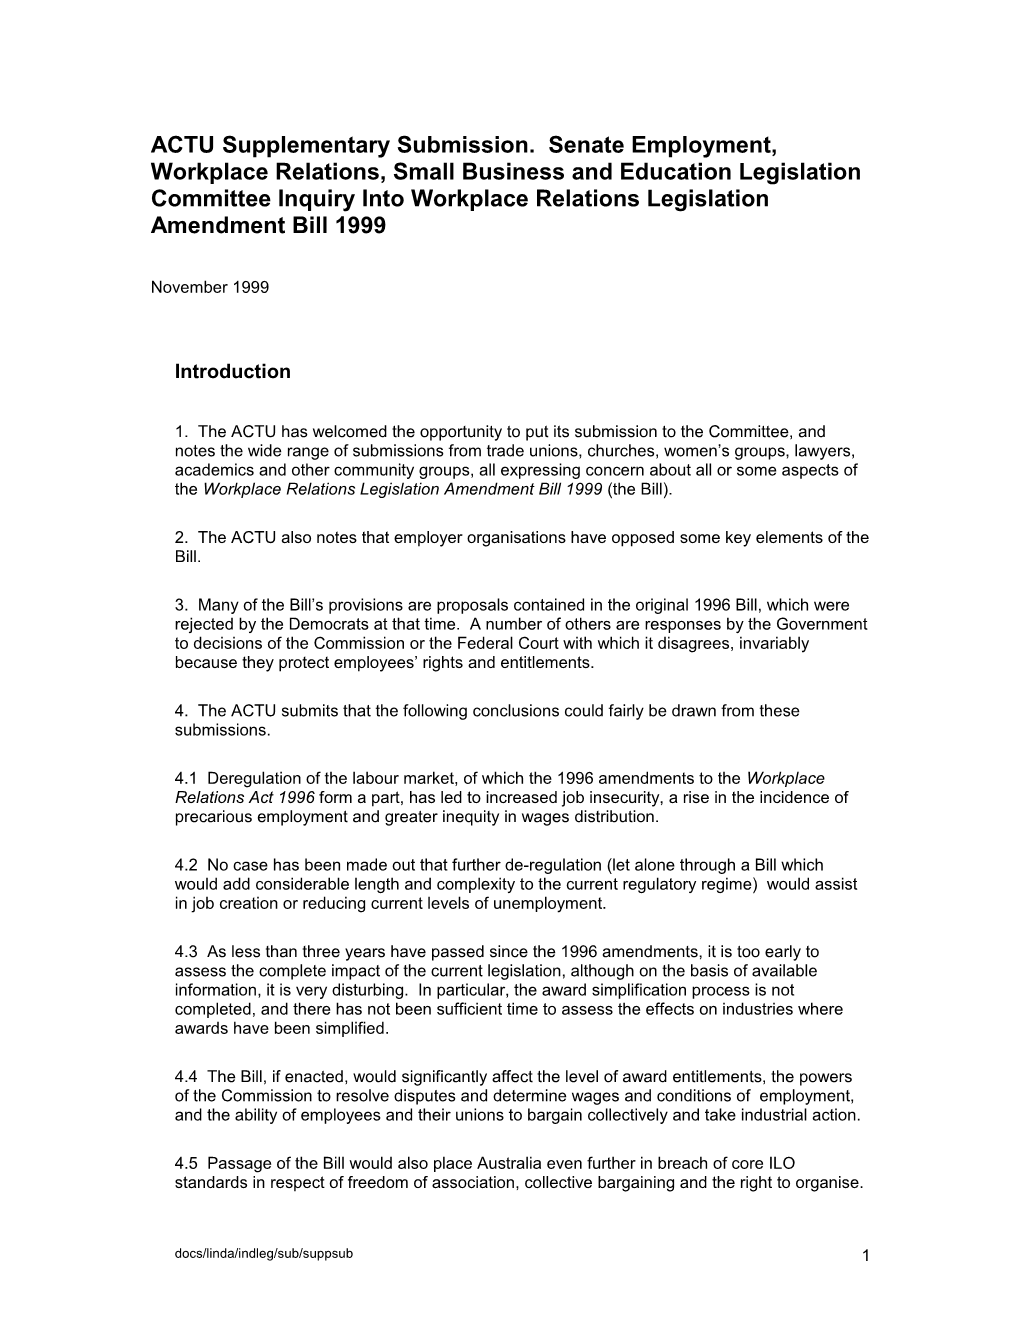 Senate Employment, Workplace Relations, Small Business and Education Legislation Committee